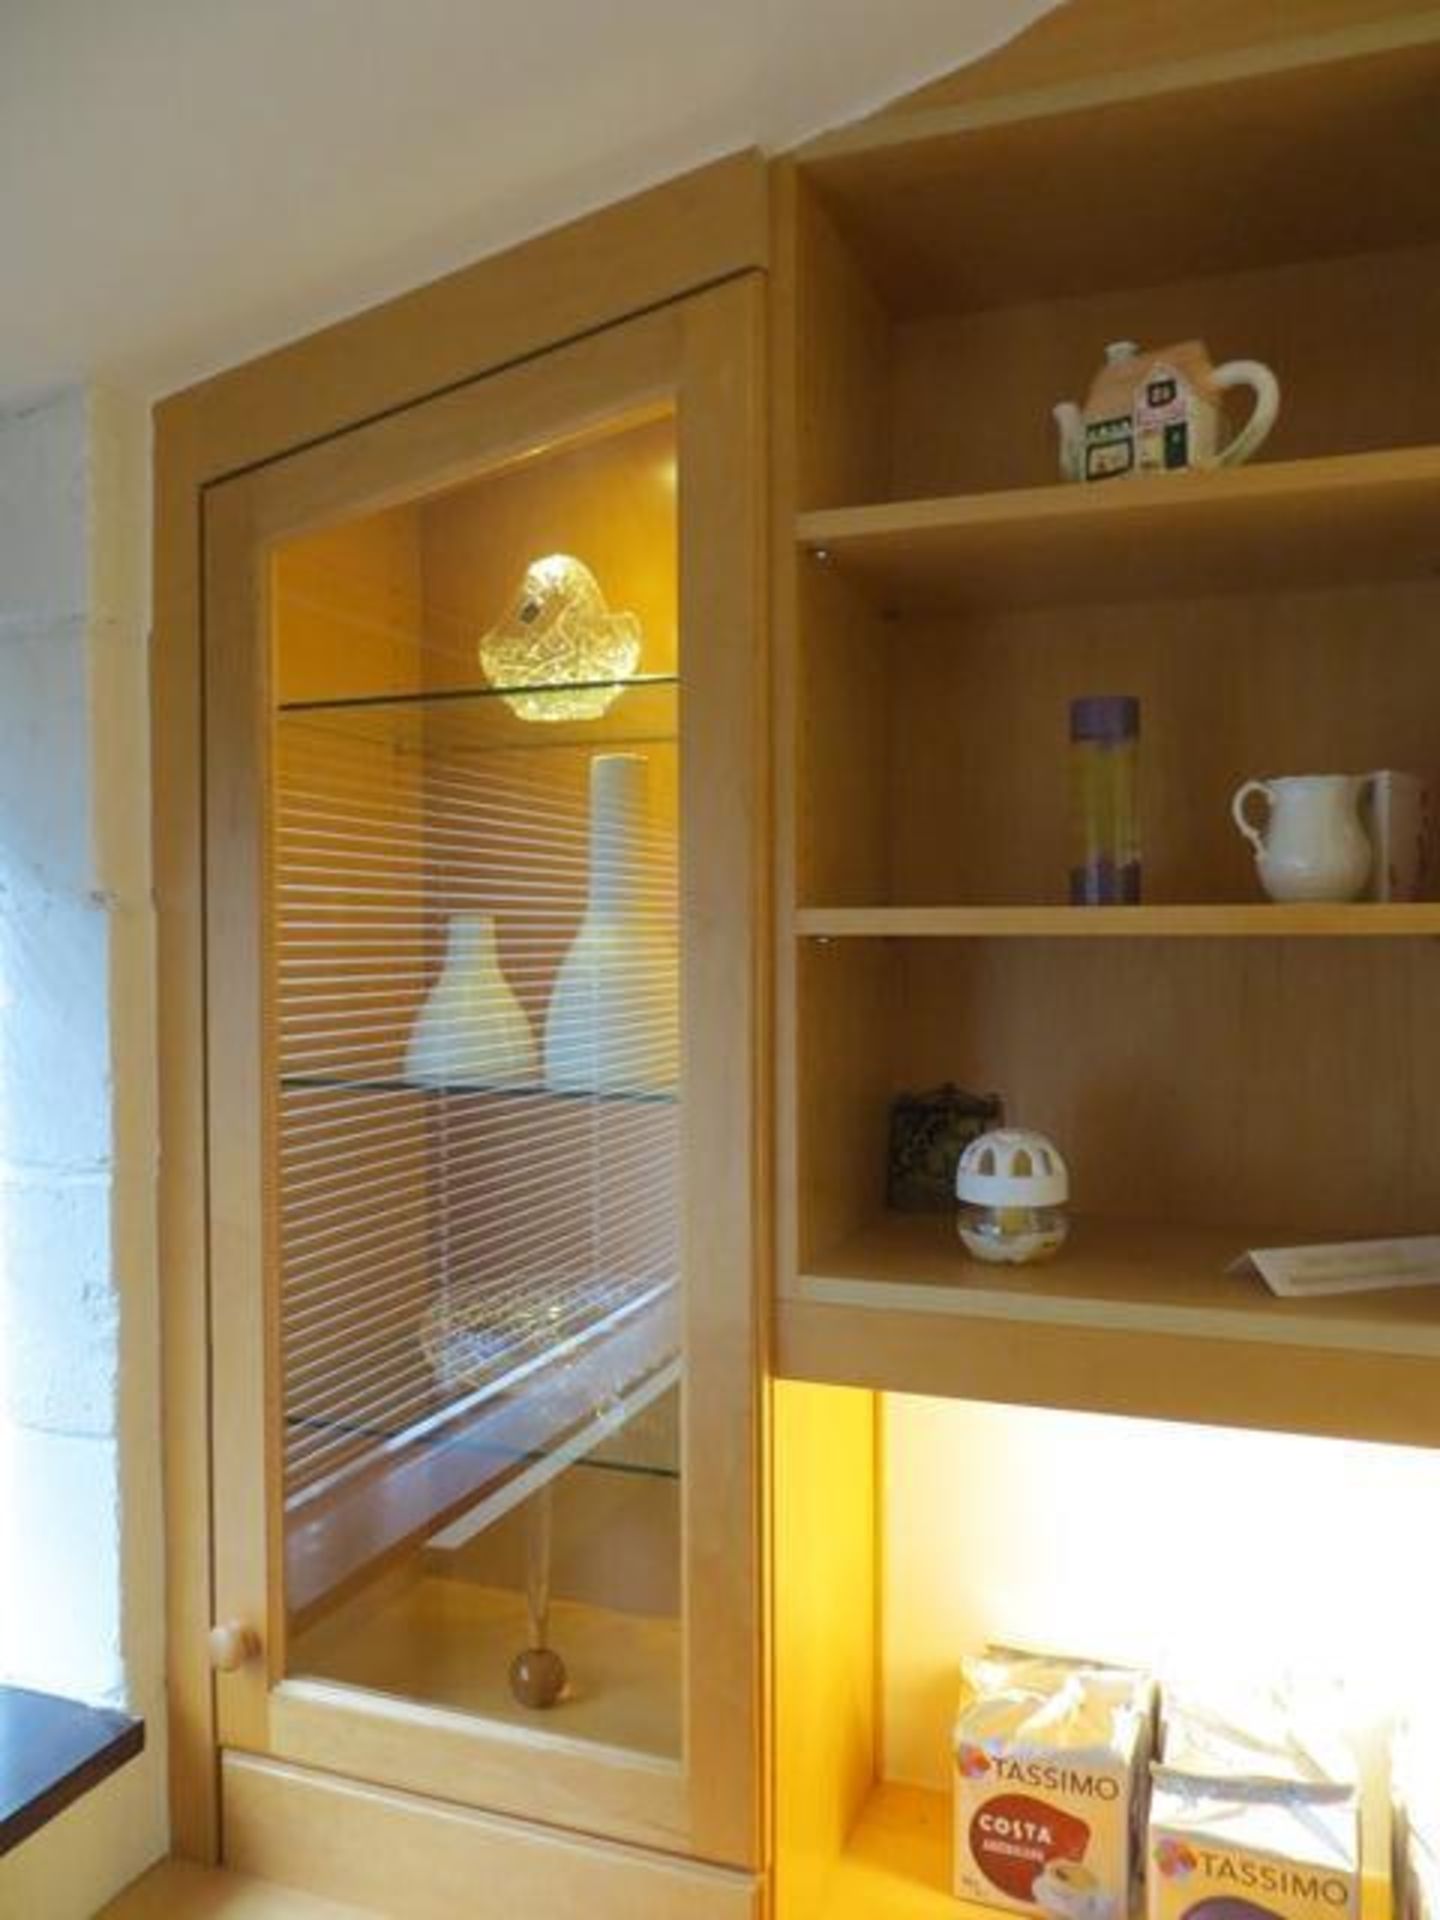 Bespoke solid wood maple with angled base drawers and cupboard with units to angled ceiling above in - Image 2 of 6